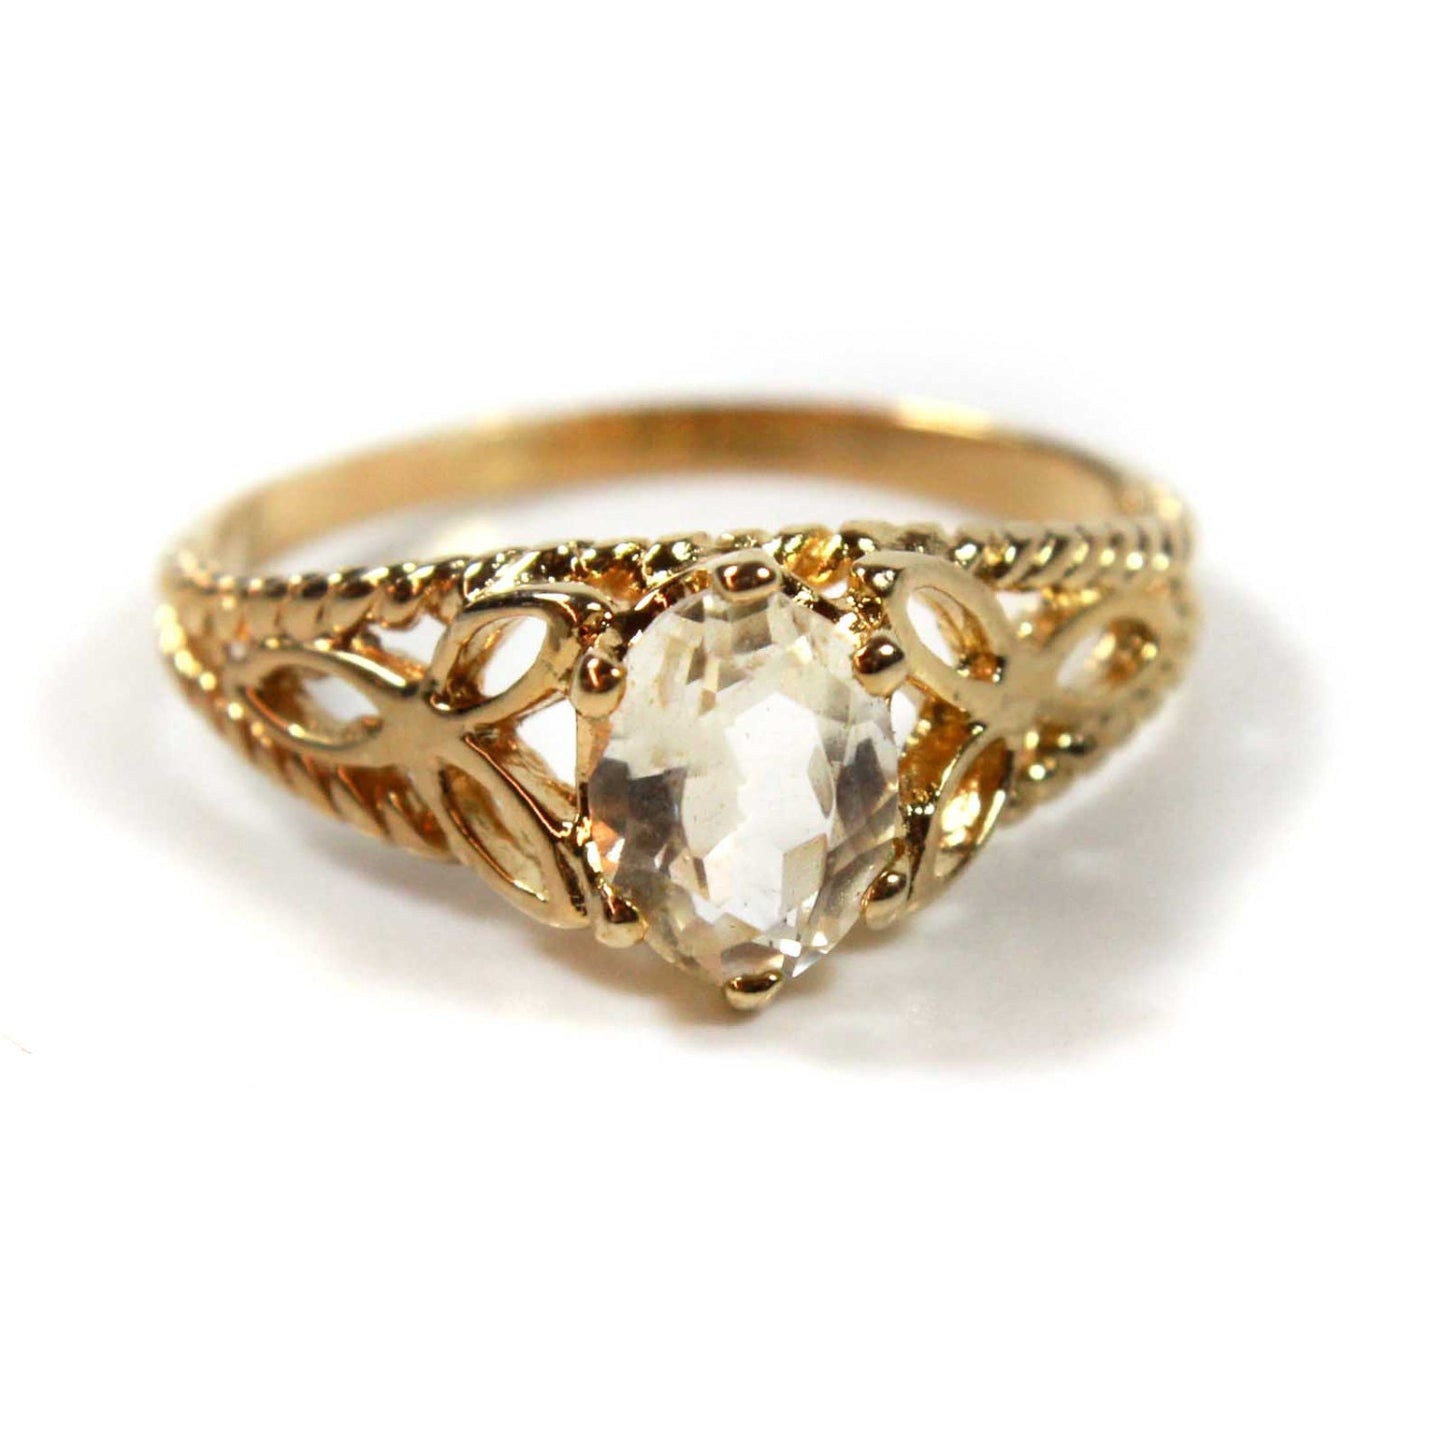 Vintage Ring Clear Swarovski Crystal 18k Gold Filigree Cocktail Ring Antique Womans Jewlery Size #R300 - Limited Stock - Never Worn